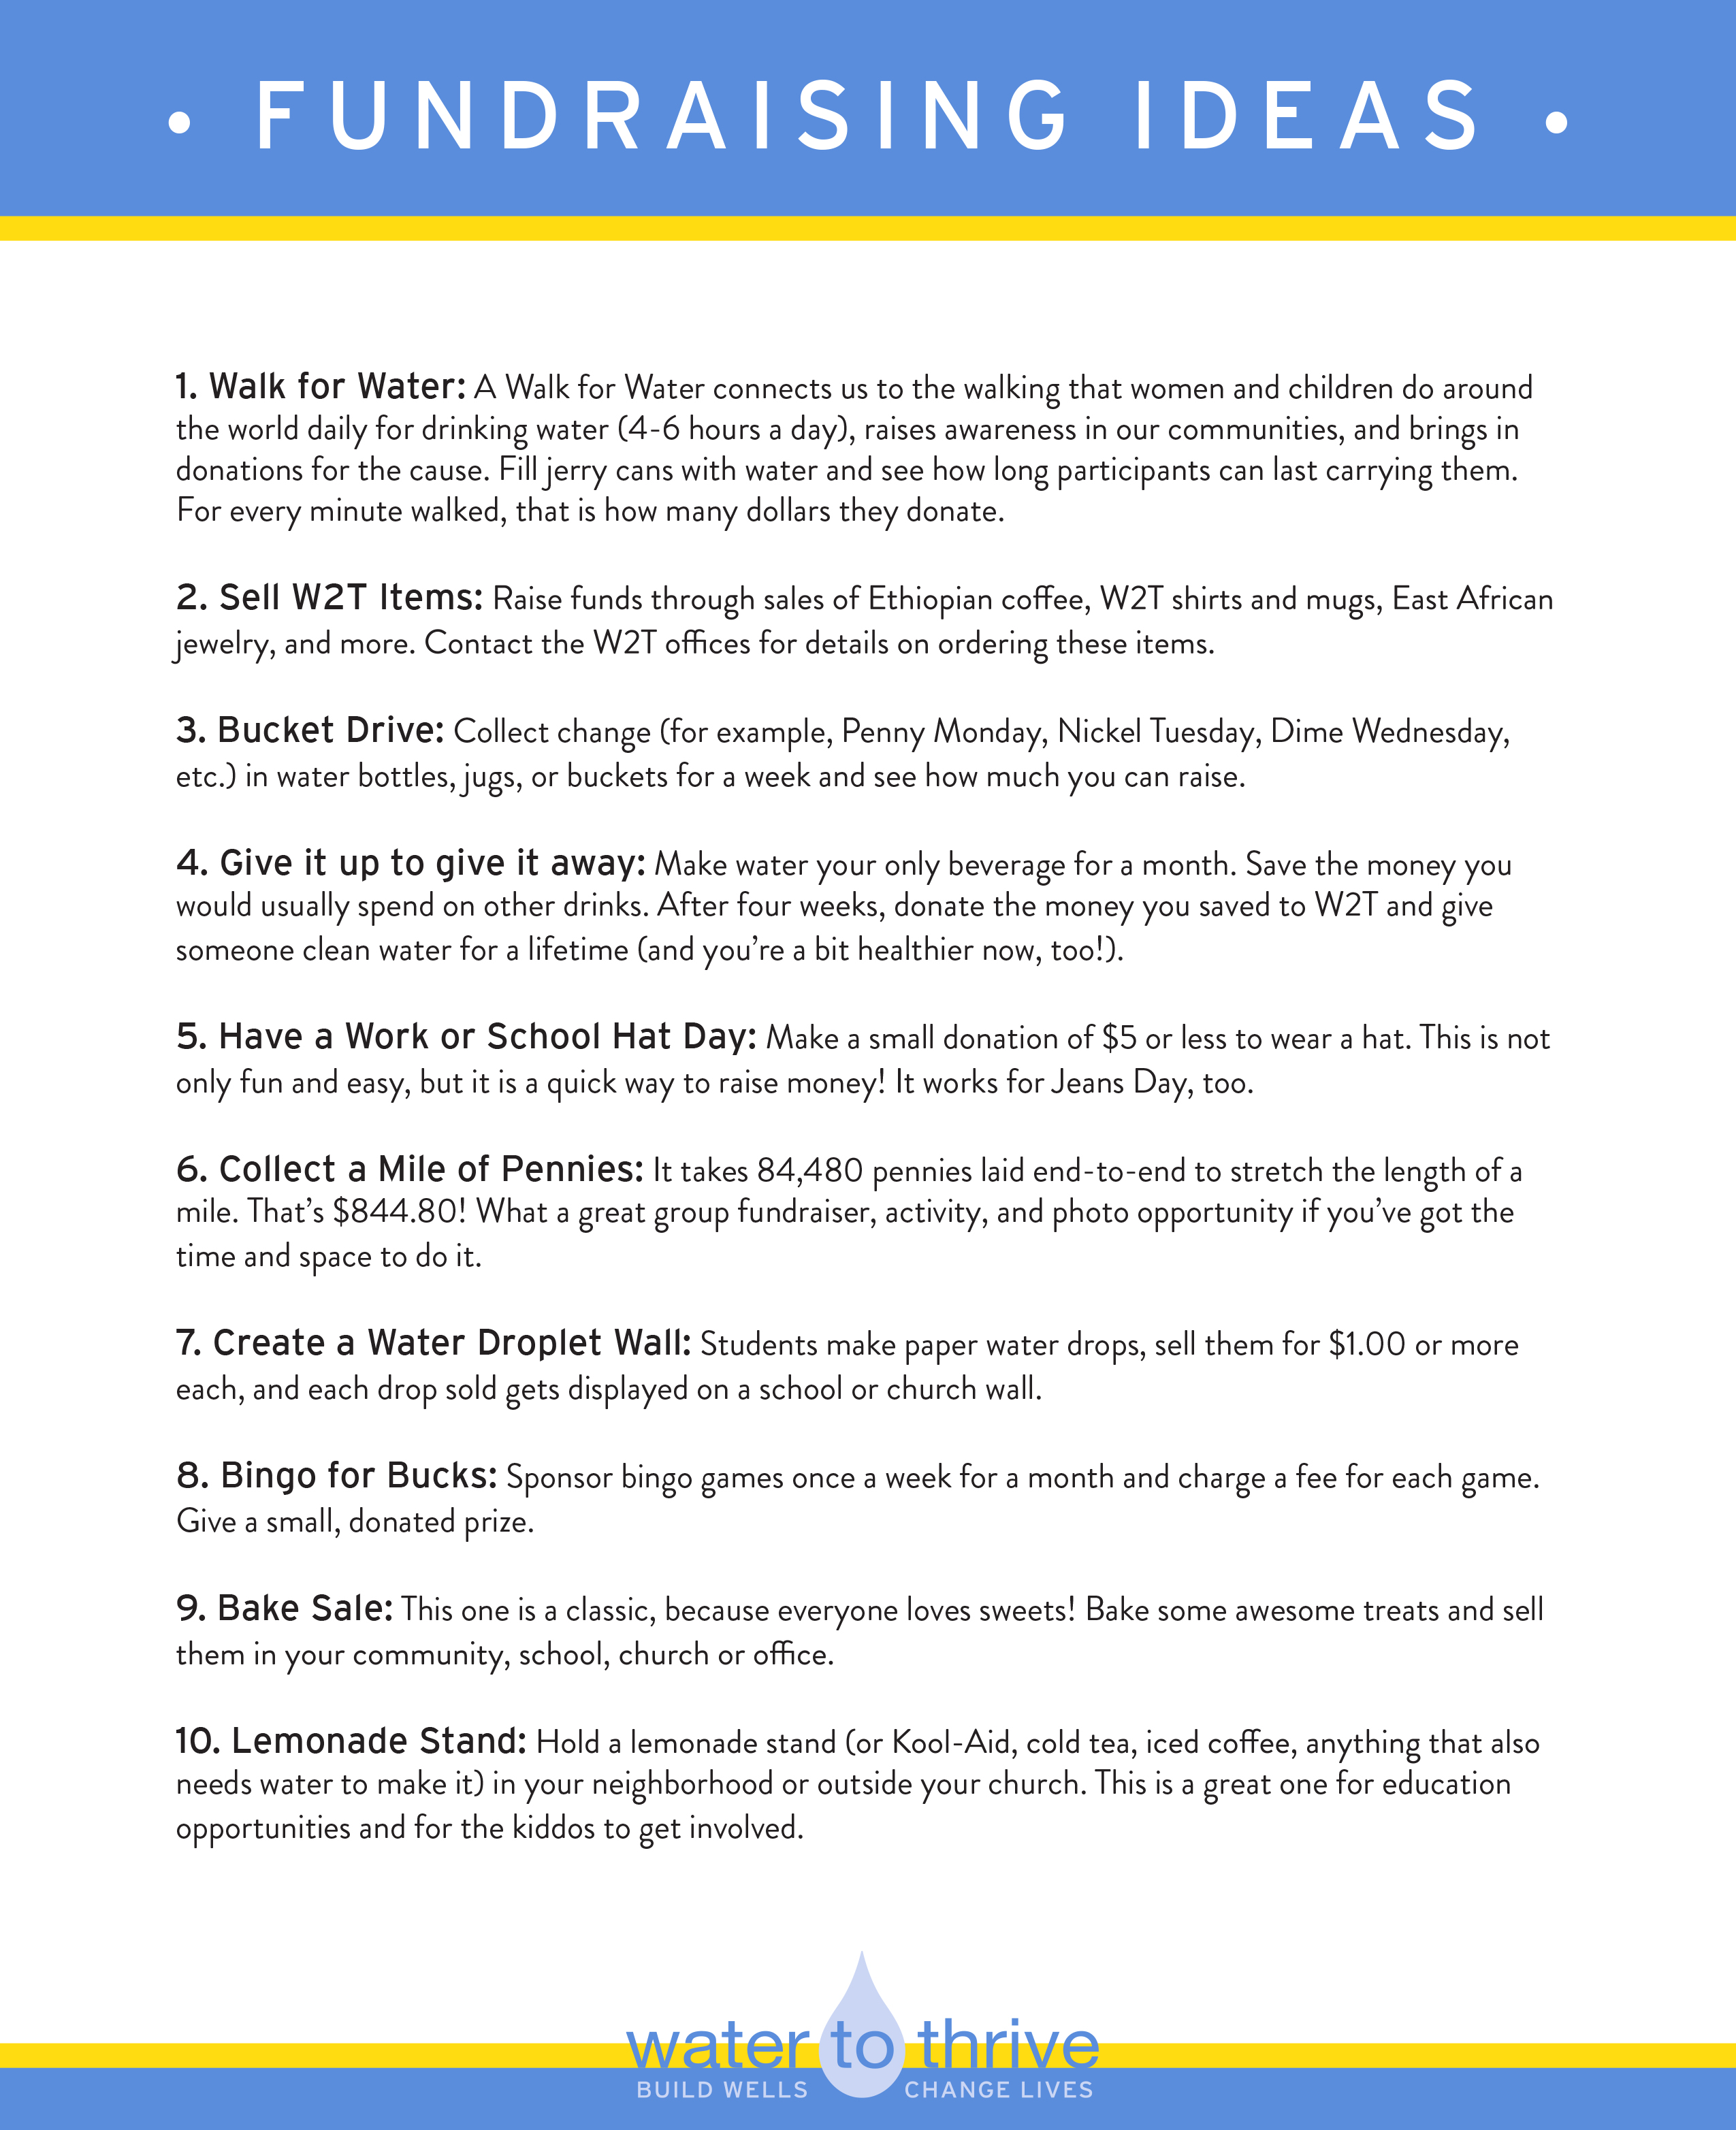 fundraising ideas handout-1 - water to thrive